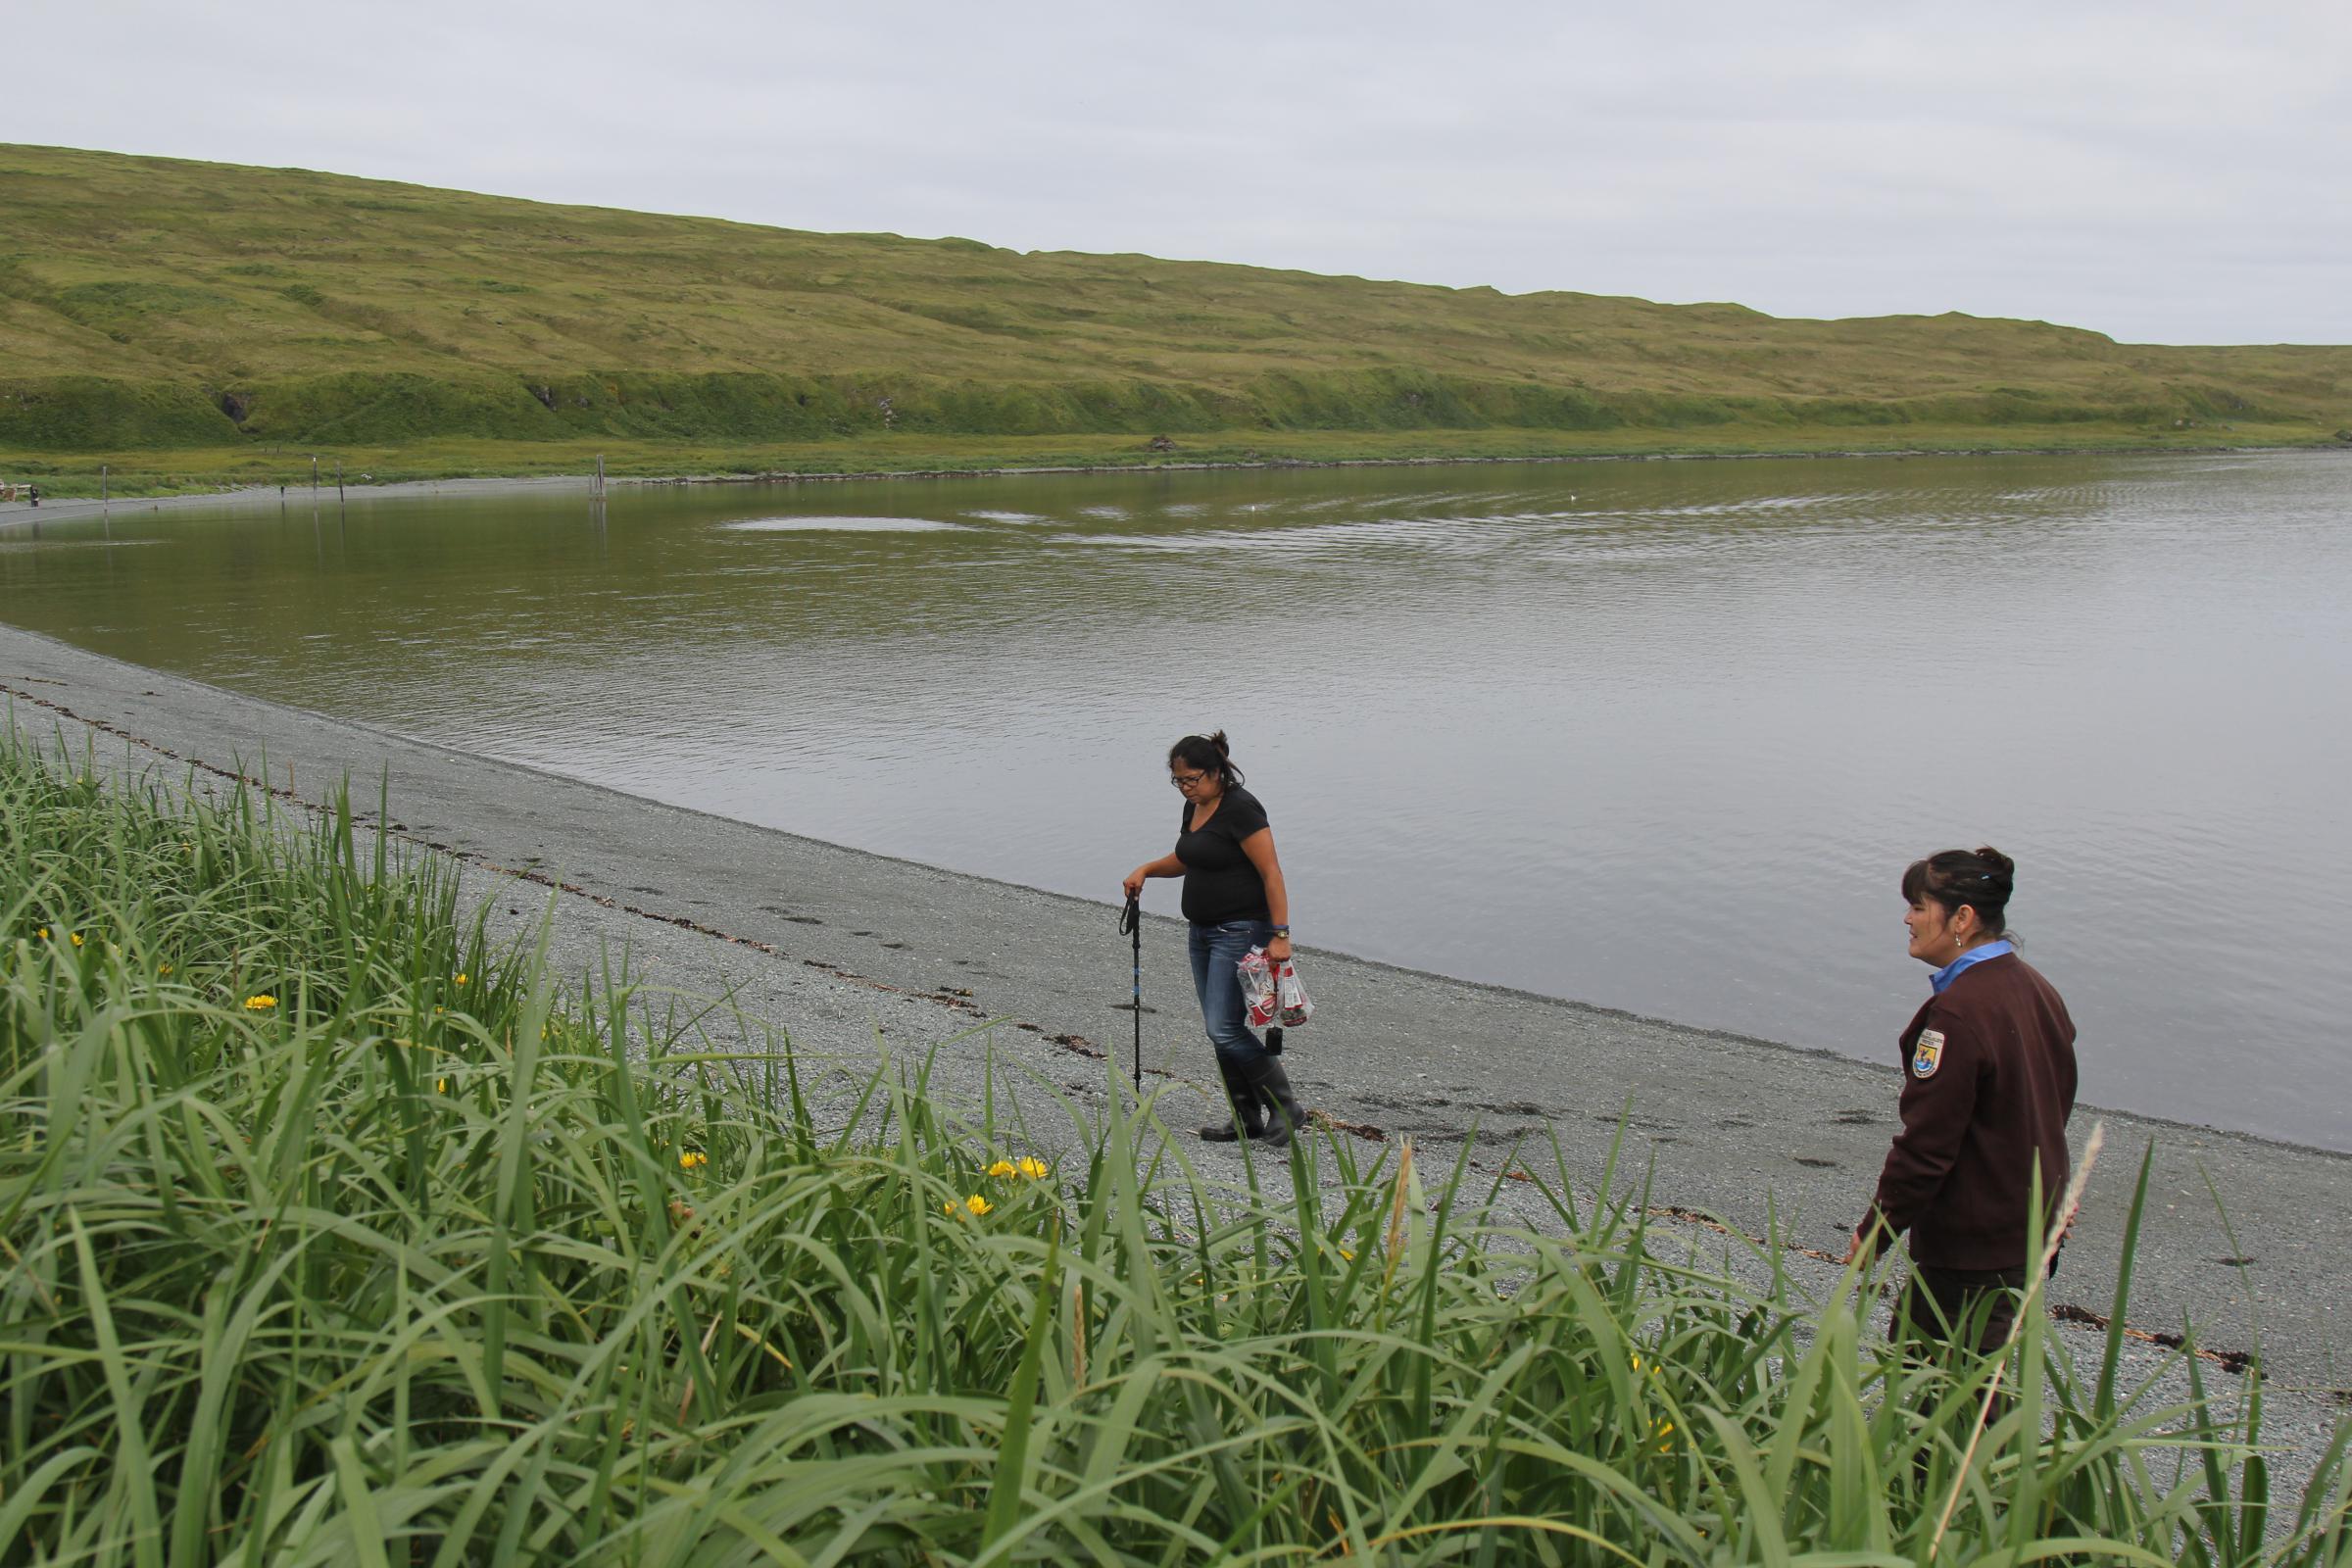 Theresa Deal, left, and Christine Kiehl peruse the beach for treasures to remember Attu. (Photo by Zoë Sobel/KUCB)